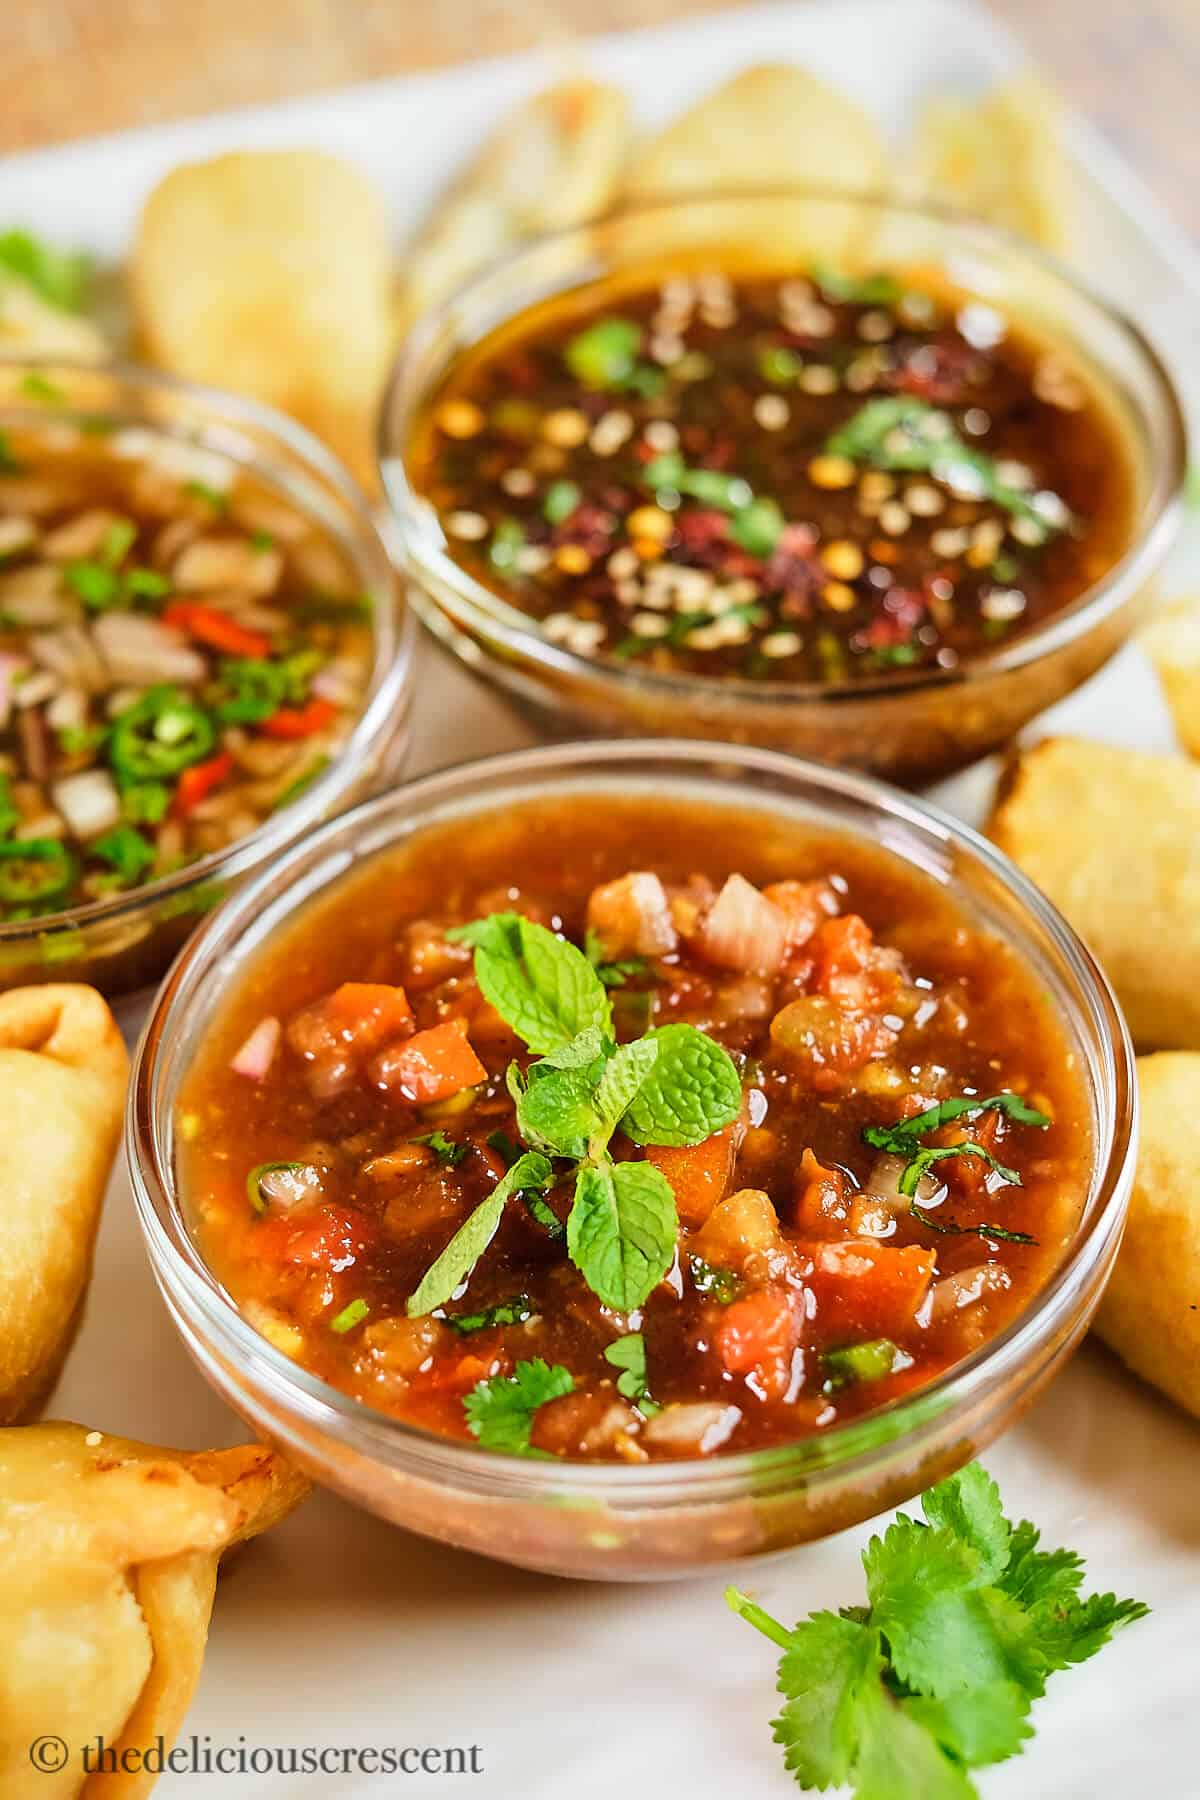 Tamarind Dipping Sauces - The Delicious Crescent